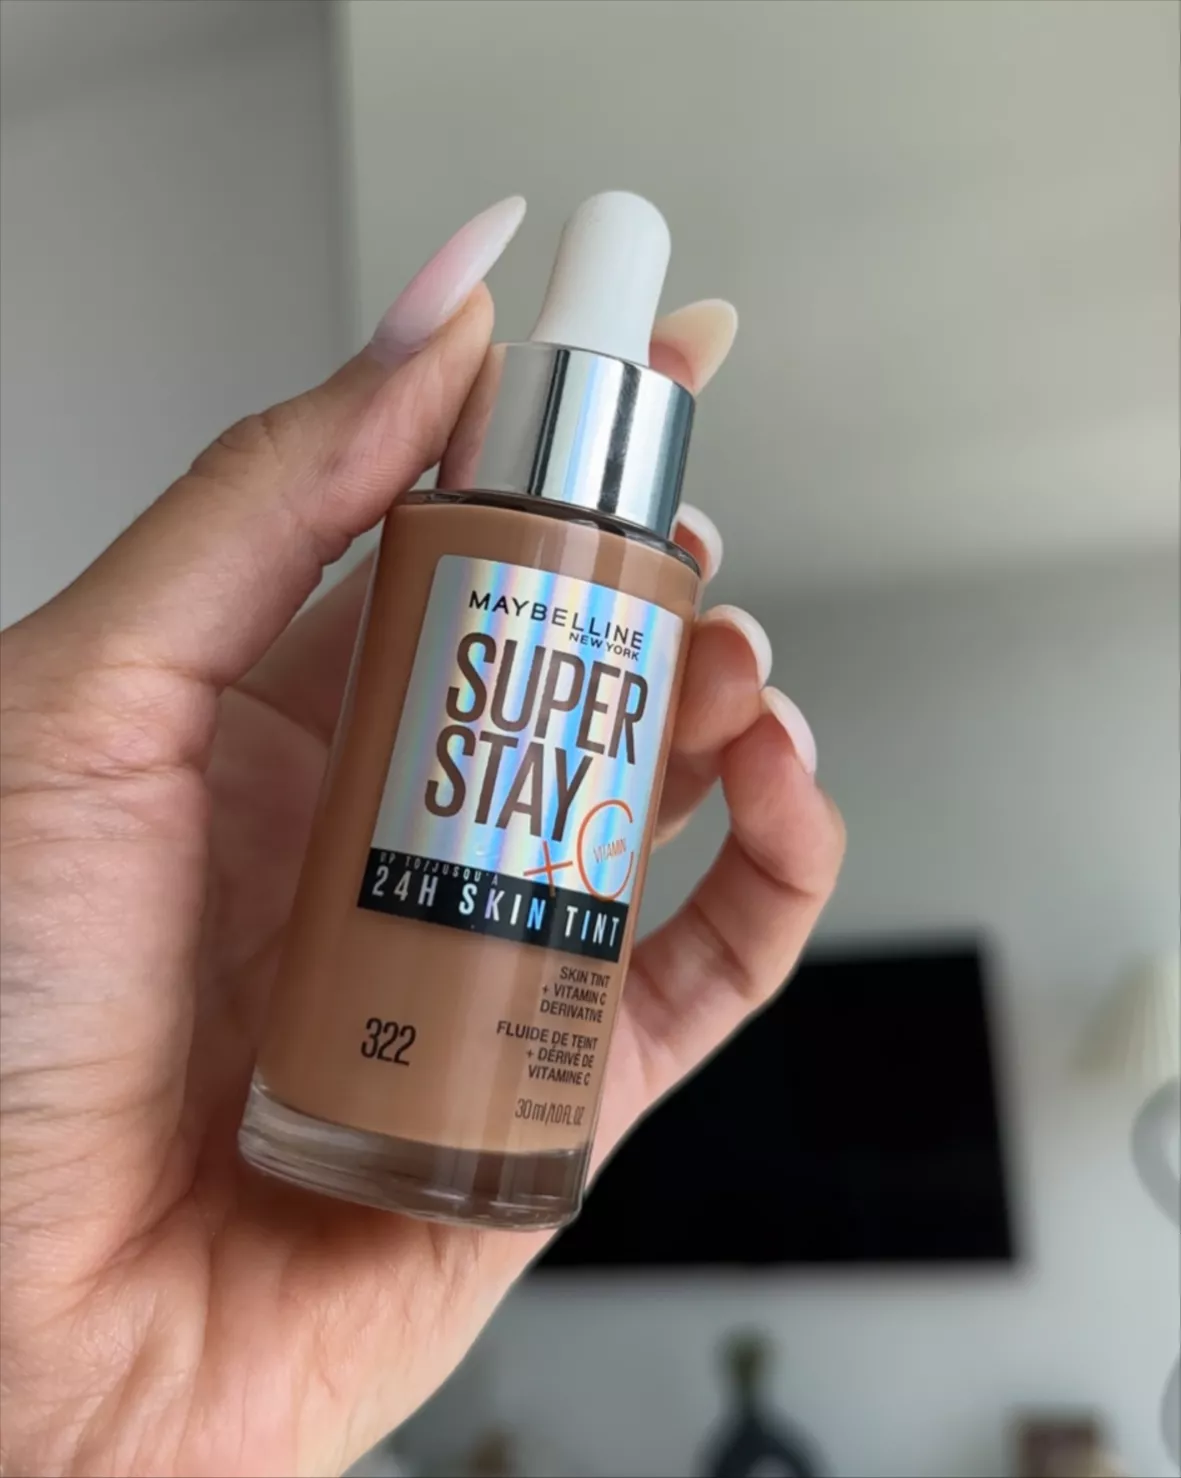 Maybelline Super Stay 24HR Skin … LTK on curated